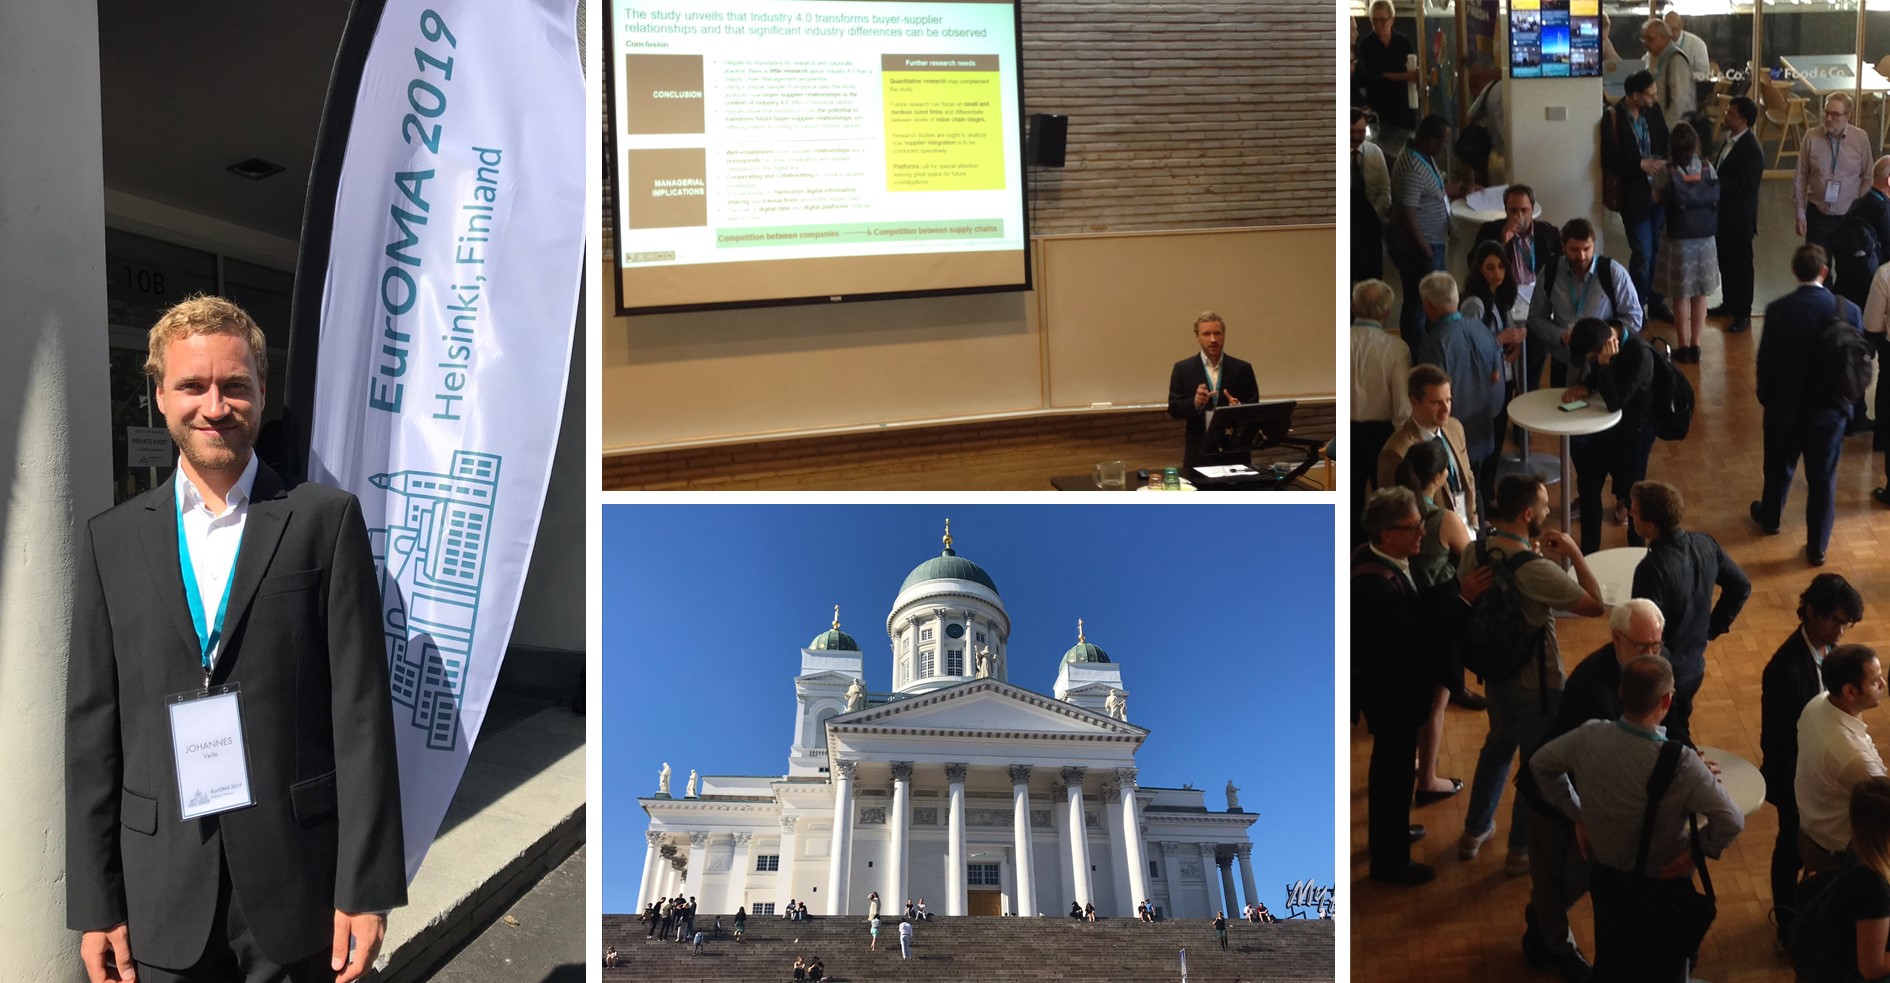 Towards entry "Industry 4.0 research results presented at EurOMA 2019 in Helsinki, Finland"